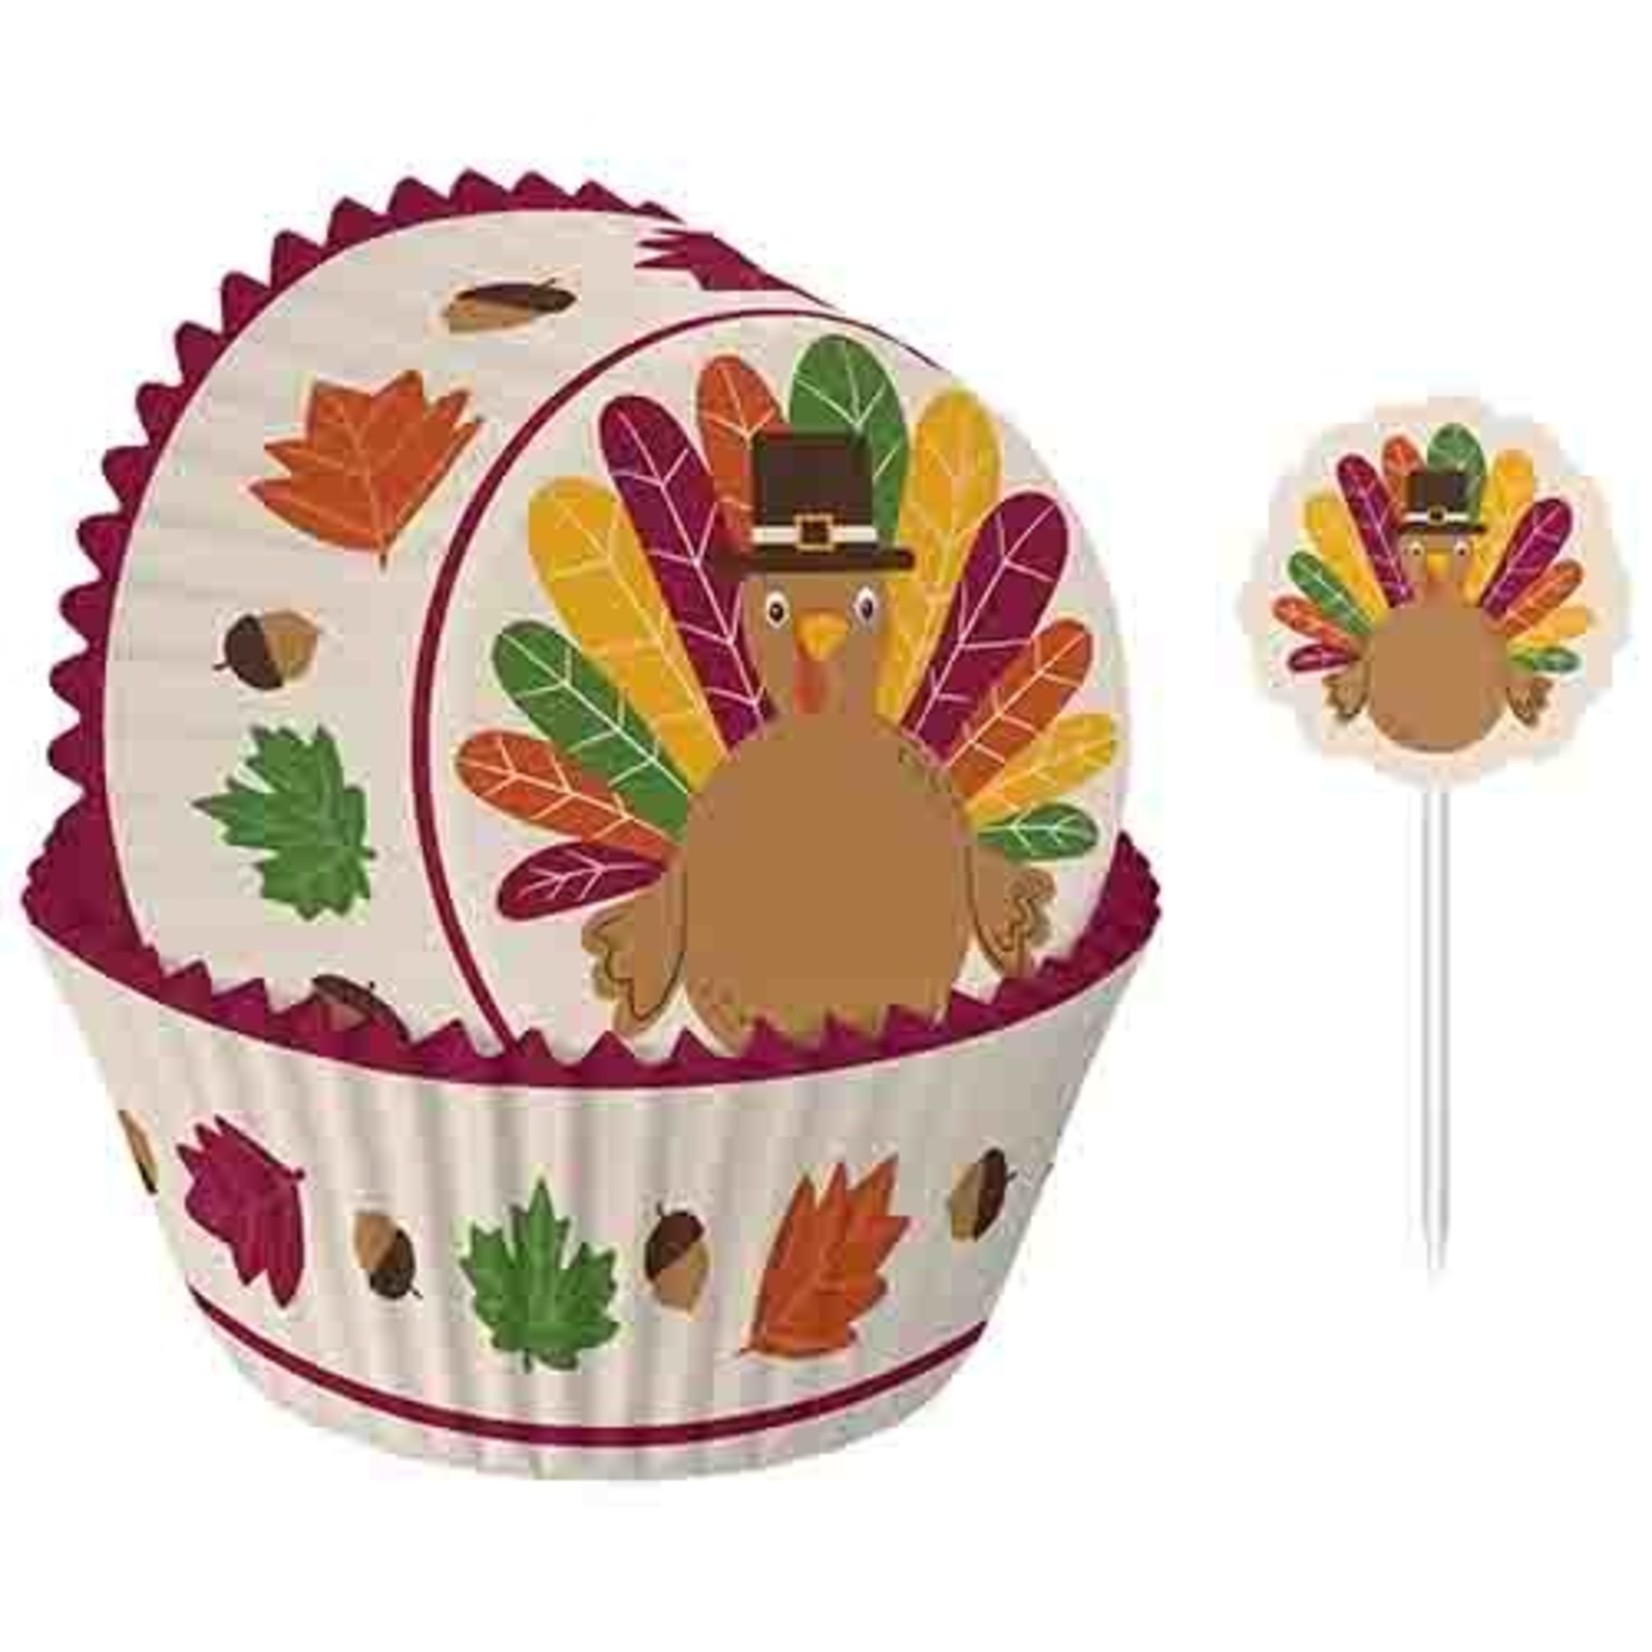 Amscan Thanksgiving Baking Picks and Cups - 24ct.